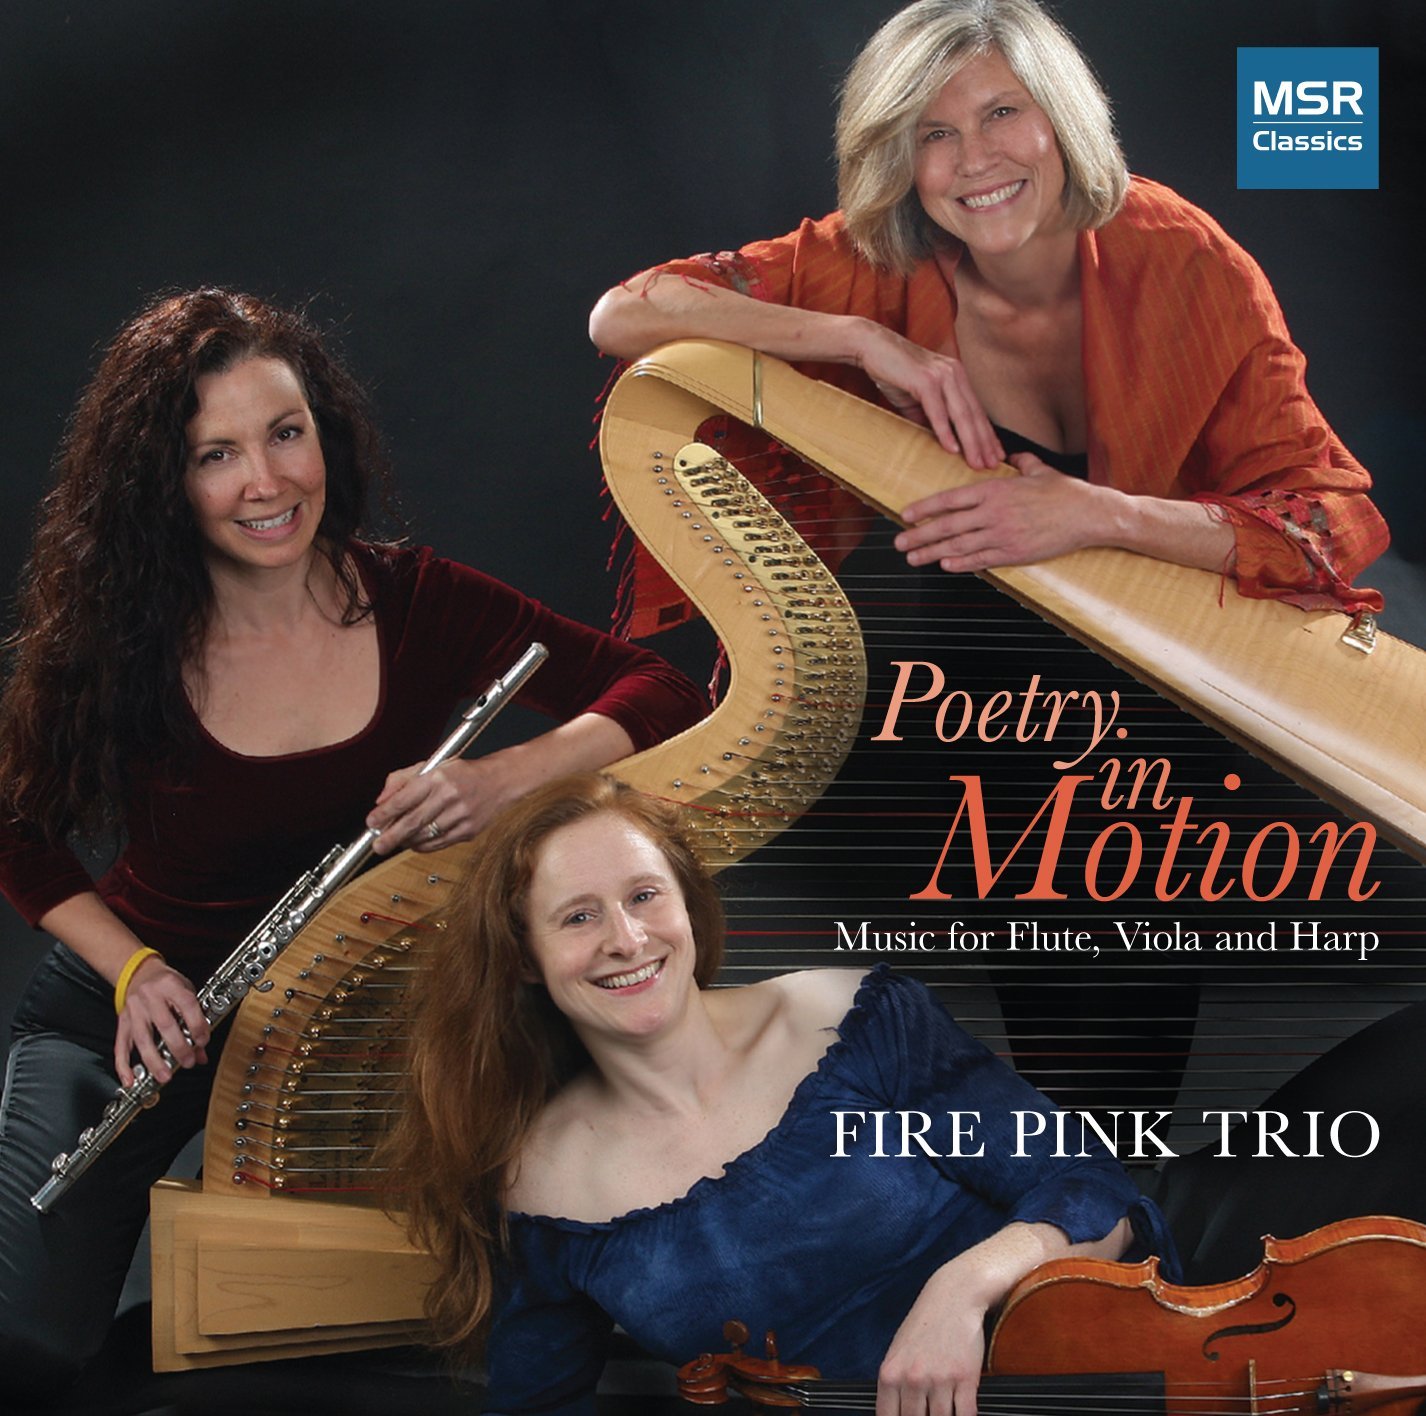 Poetry in Motion: Music for Flute, Viola and Harp (Fire Pink Trio)